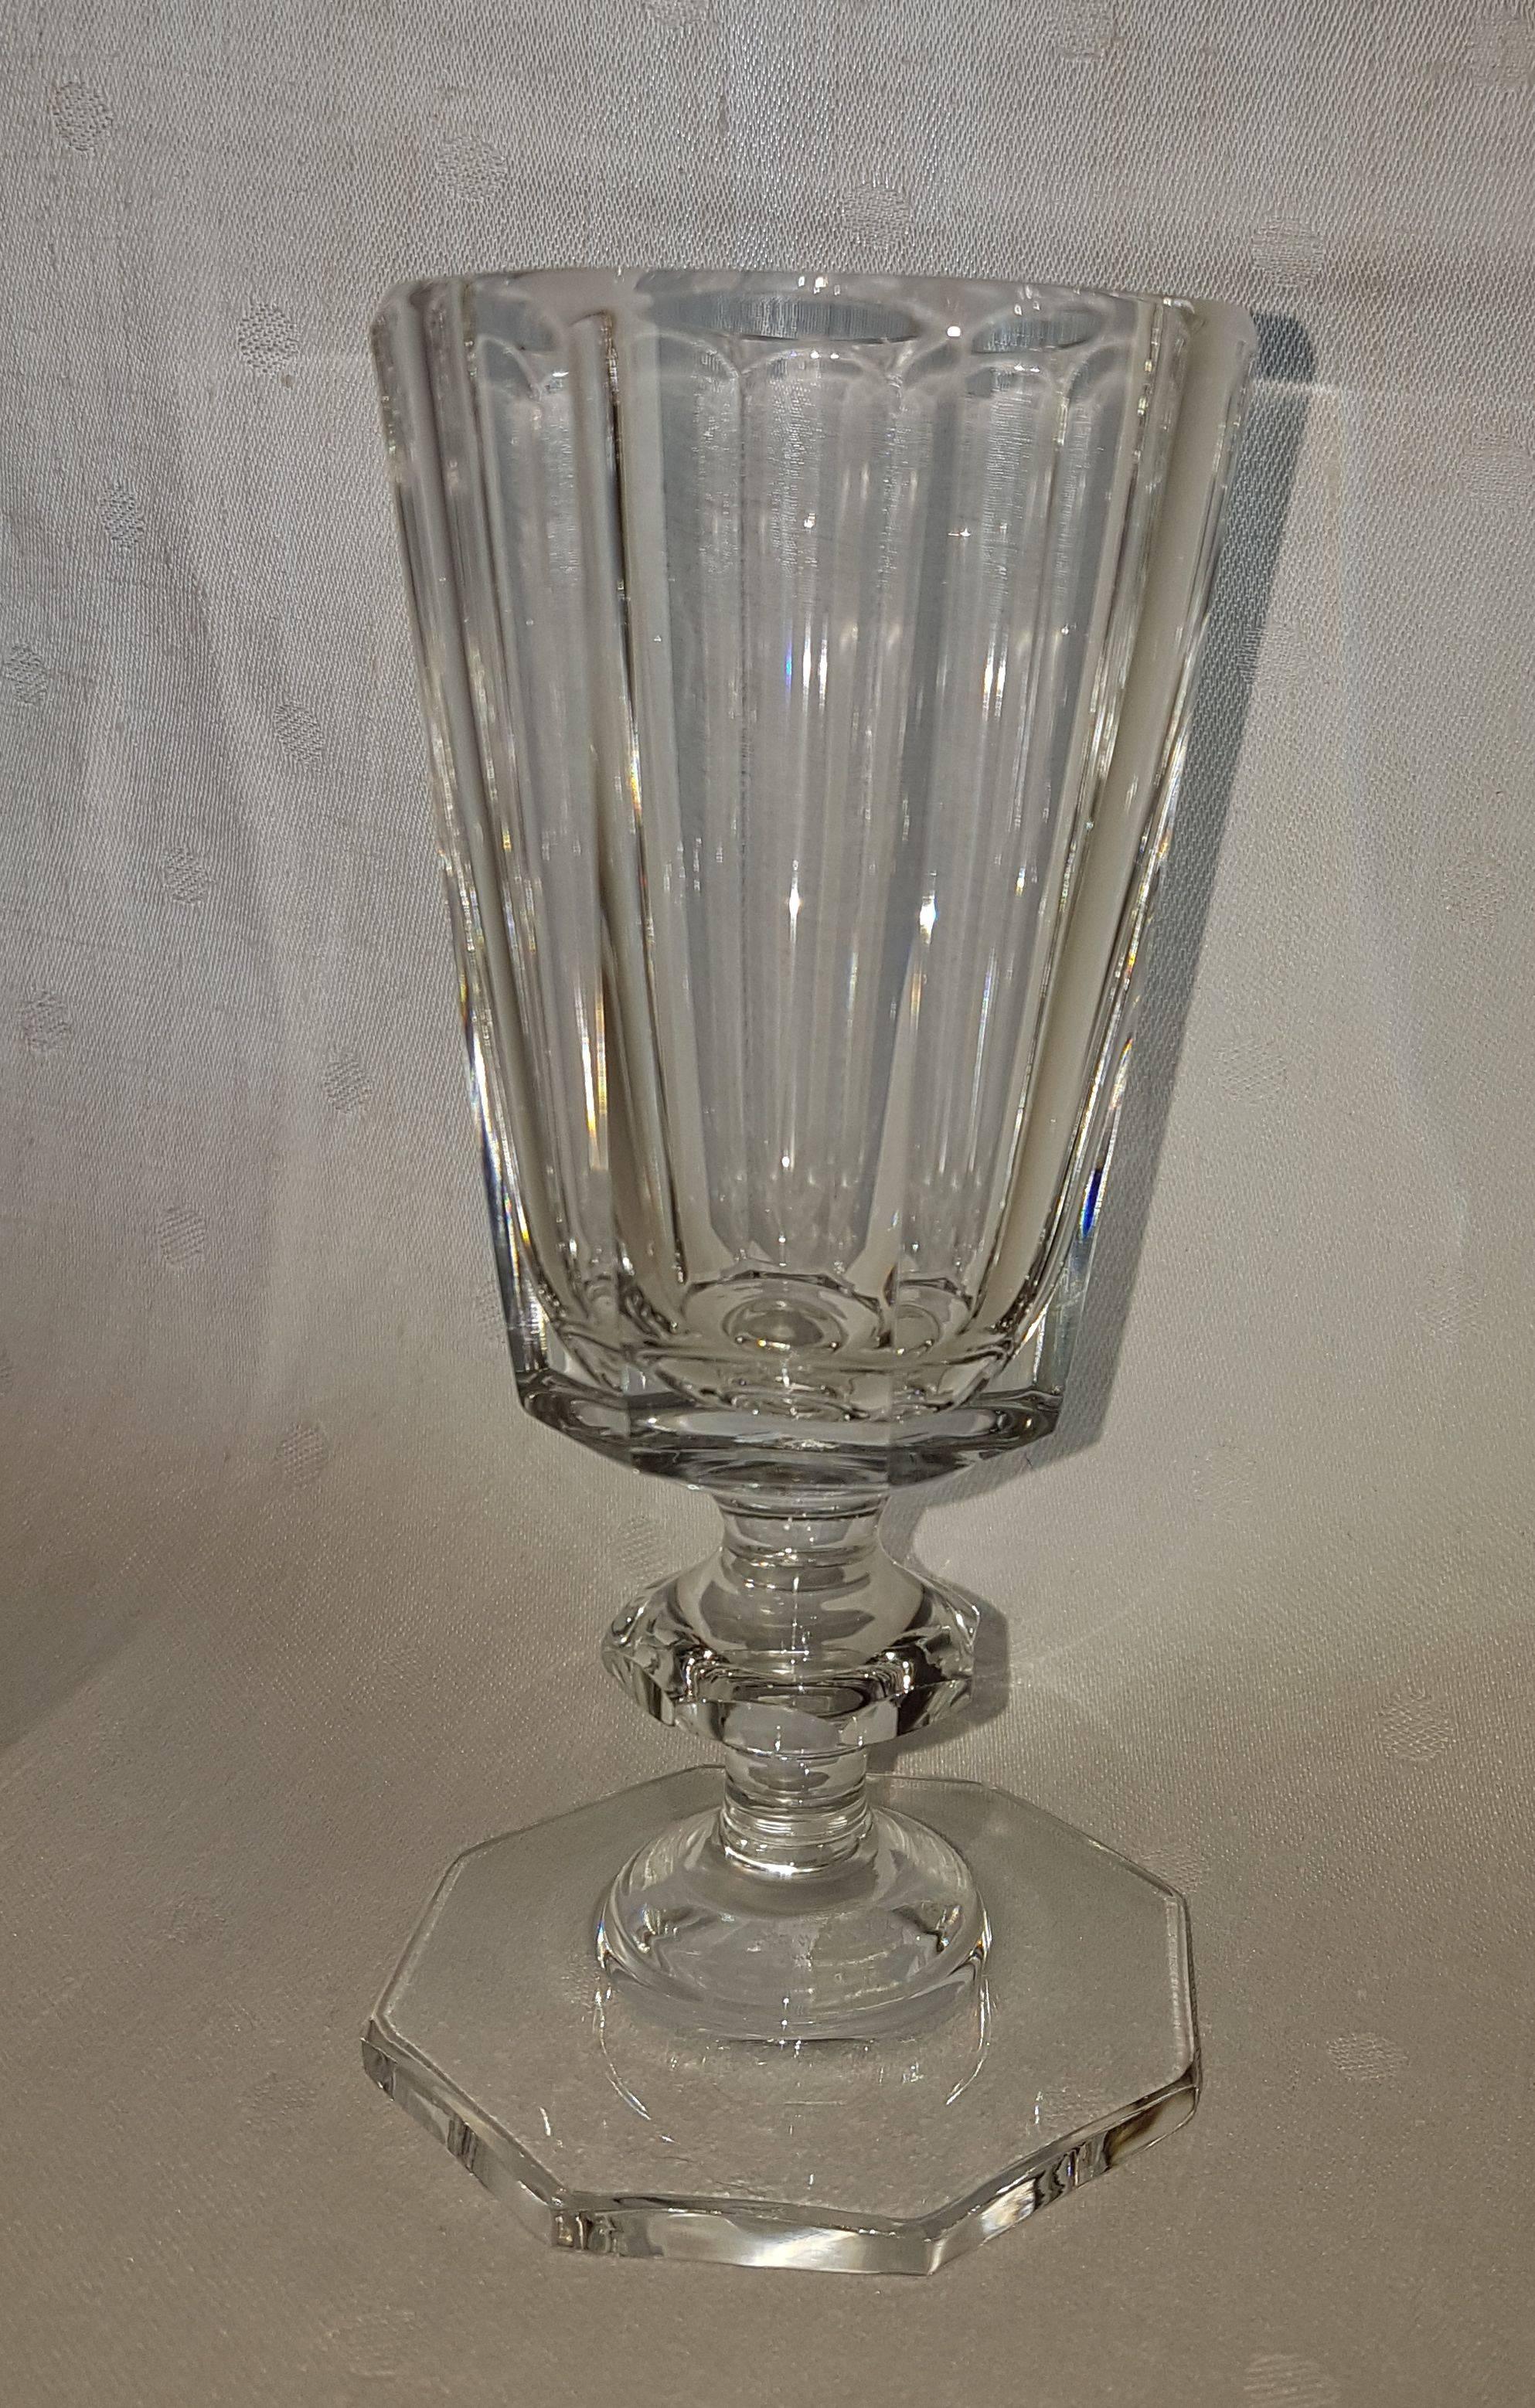 Mouth blown hand-cut crystal glass goblets made in Germany: solid, noble, elegant.
The “Biedermeier” inspired style, with bevelled body, base and stem pearl,
gives them a timeless beauty.
Rounded off edges for more comfortable drinking.
A